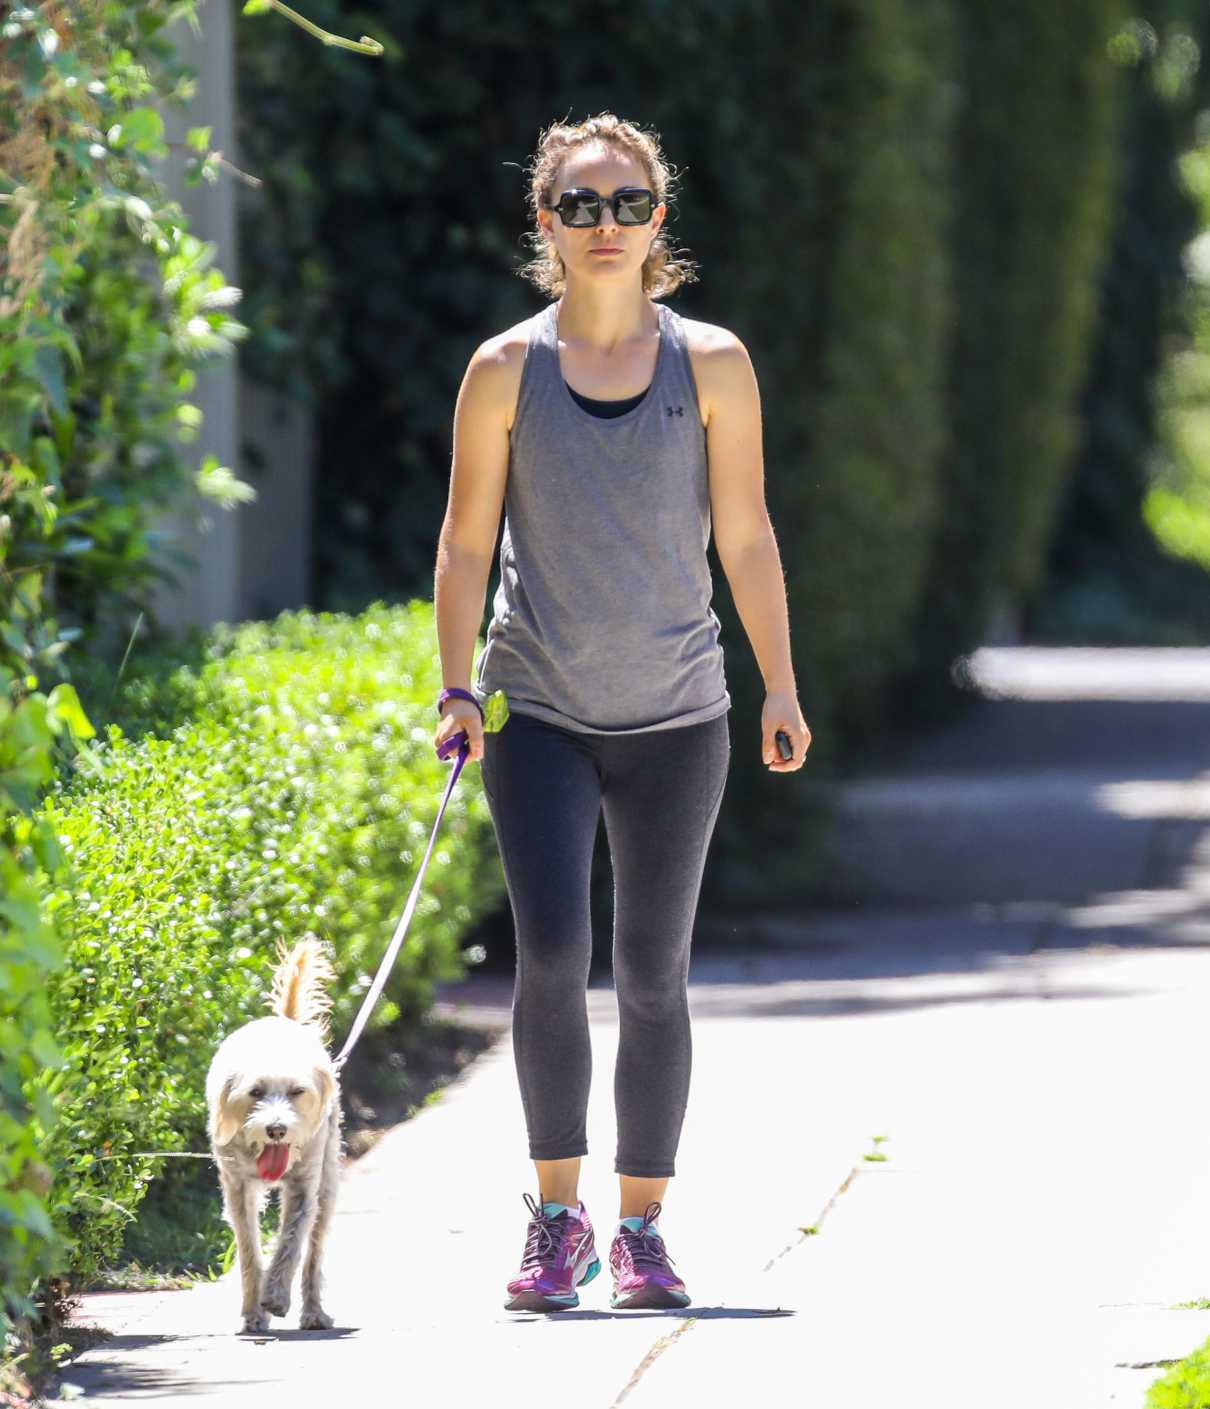 Natalie Portman in a Gray Tank Top Was Seen Out with Her Pup Charlie in ...